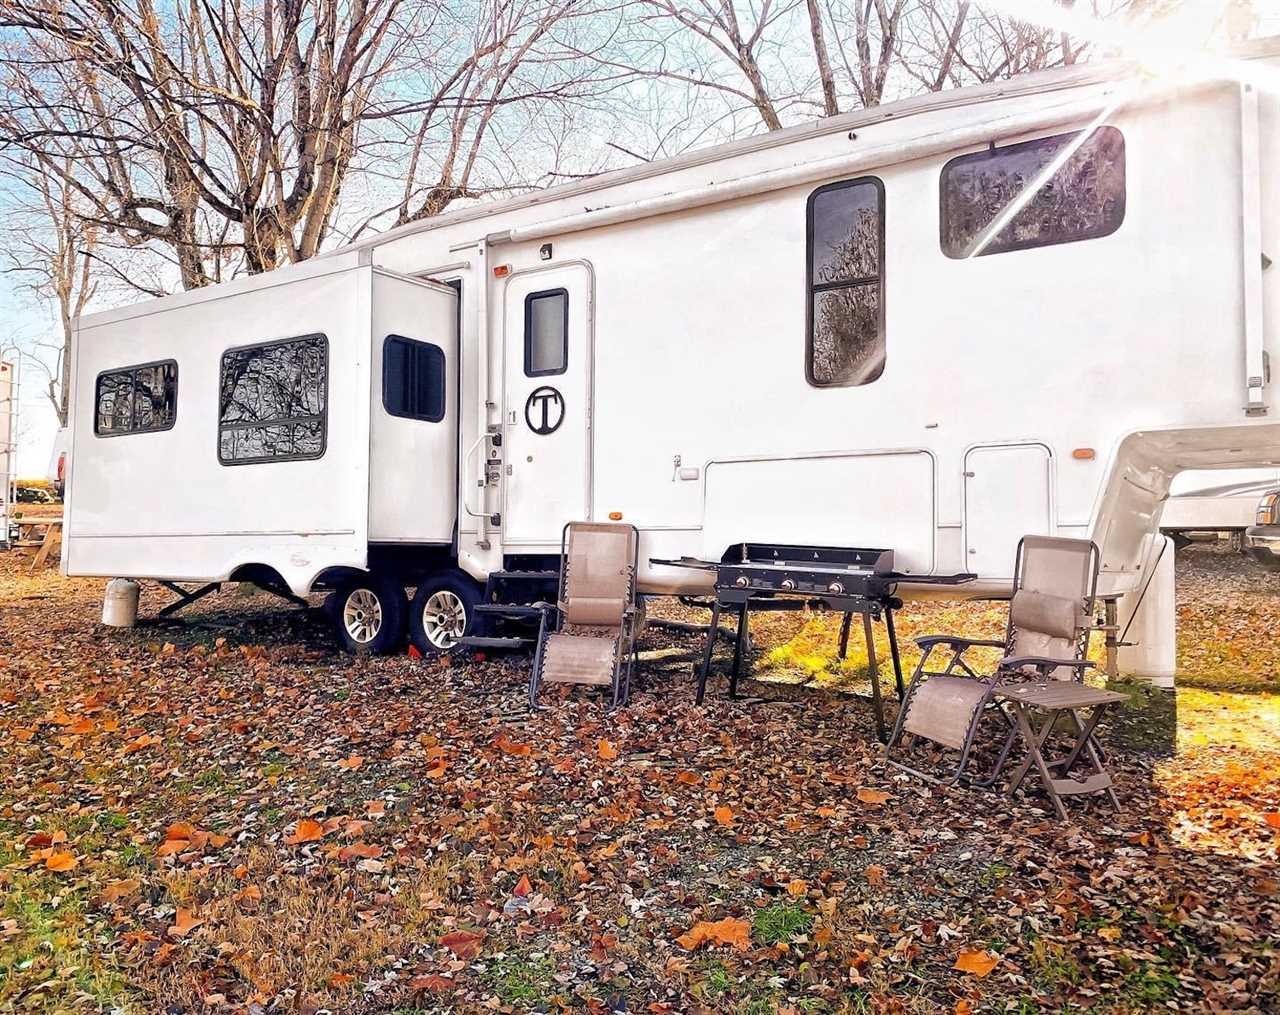 place-to-park-rv-how-to-live-in-an-rv-full-time-to-save-on-city-living-08-2022 